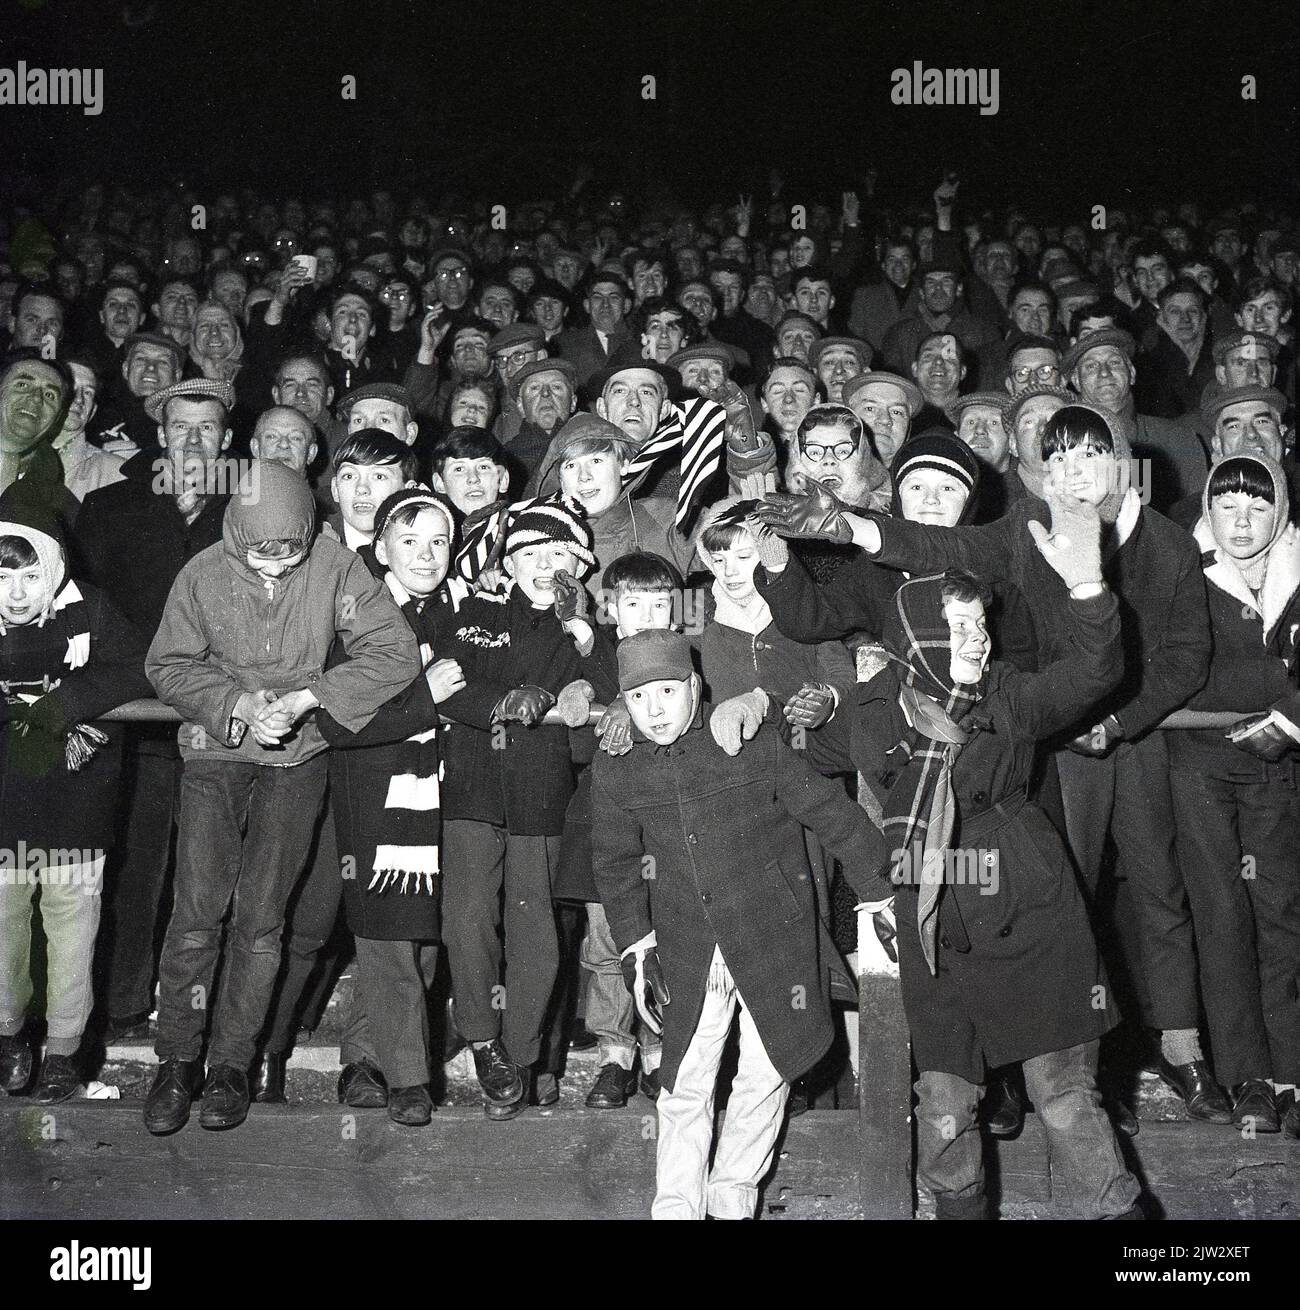 1960s, historical, football fans, evening match, coats, flat caps for the men, duffel coats and bobble hats for the youngsters, not a replica shirt in sight! Stock Photo